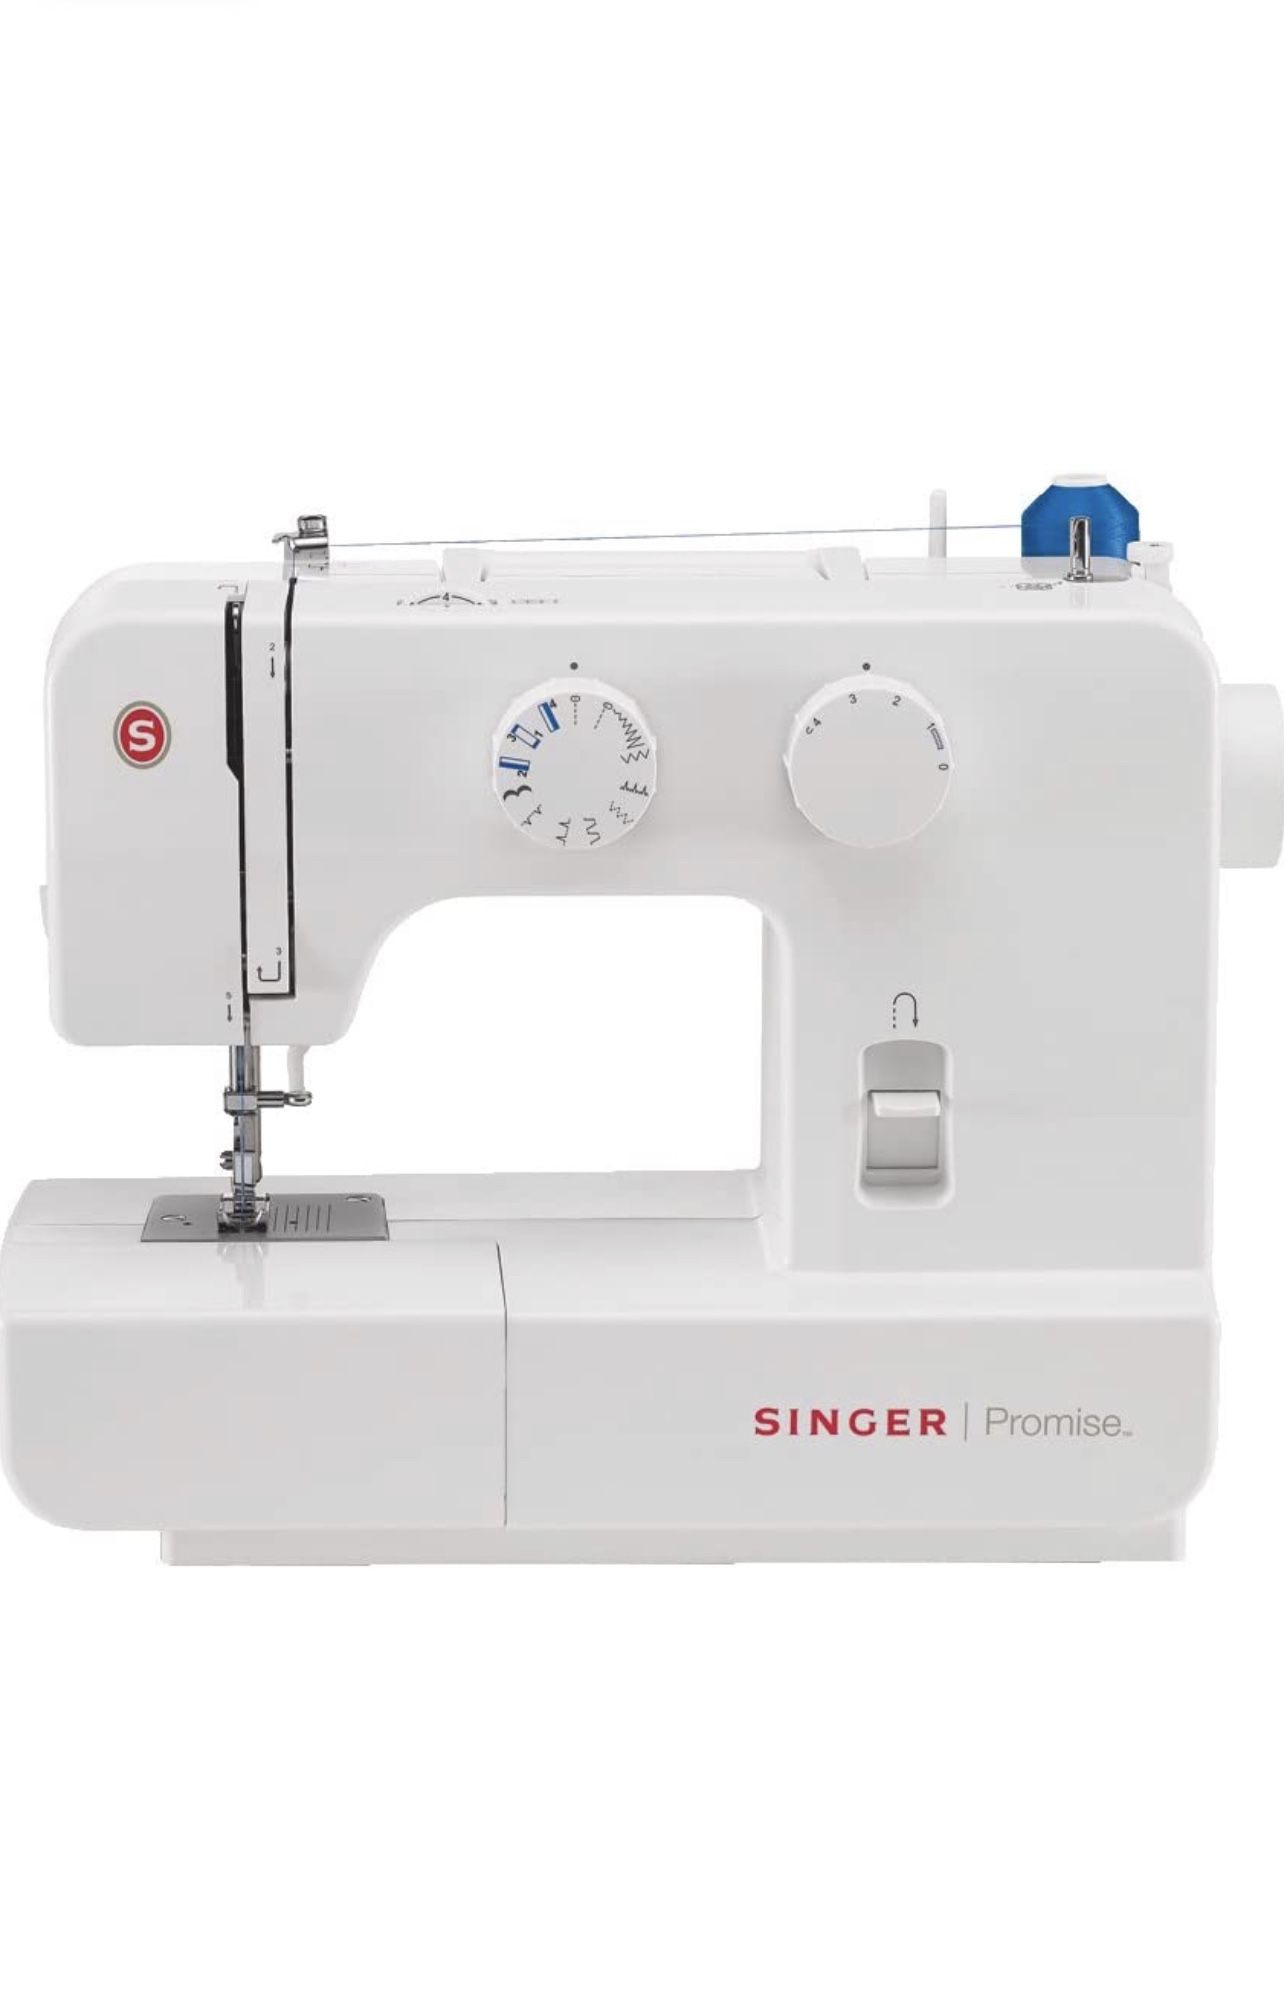 Singer promise 1409 Sewing Machine Brand New